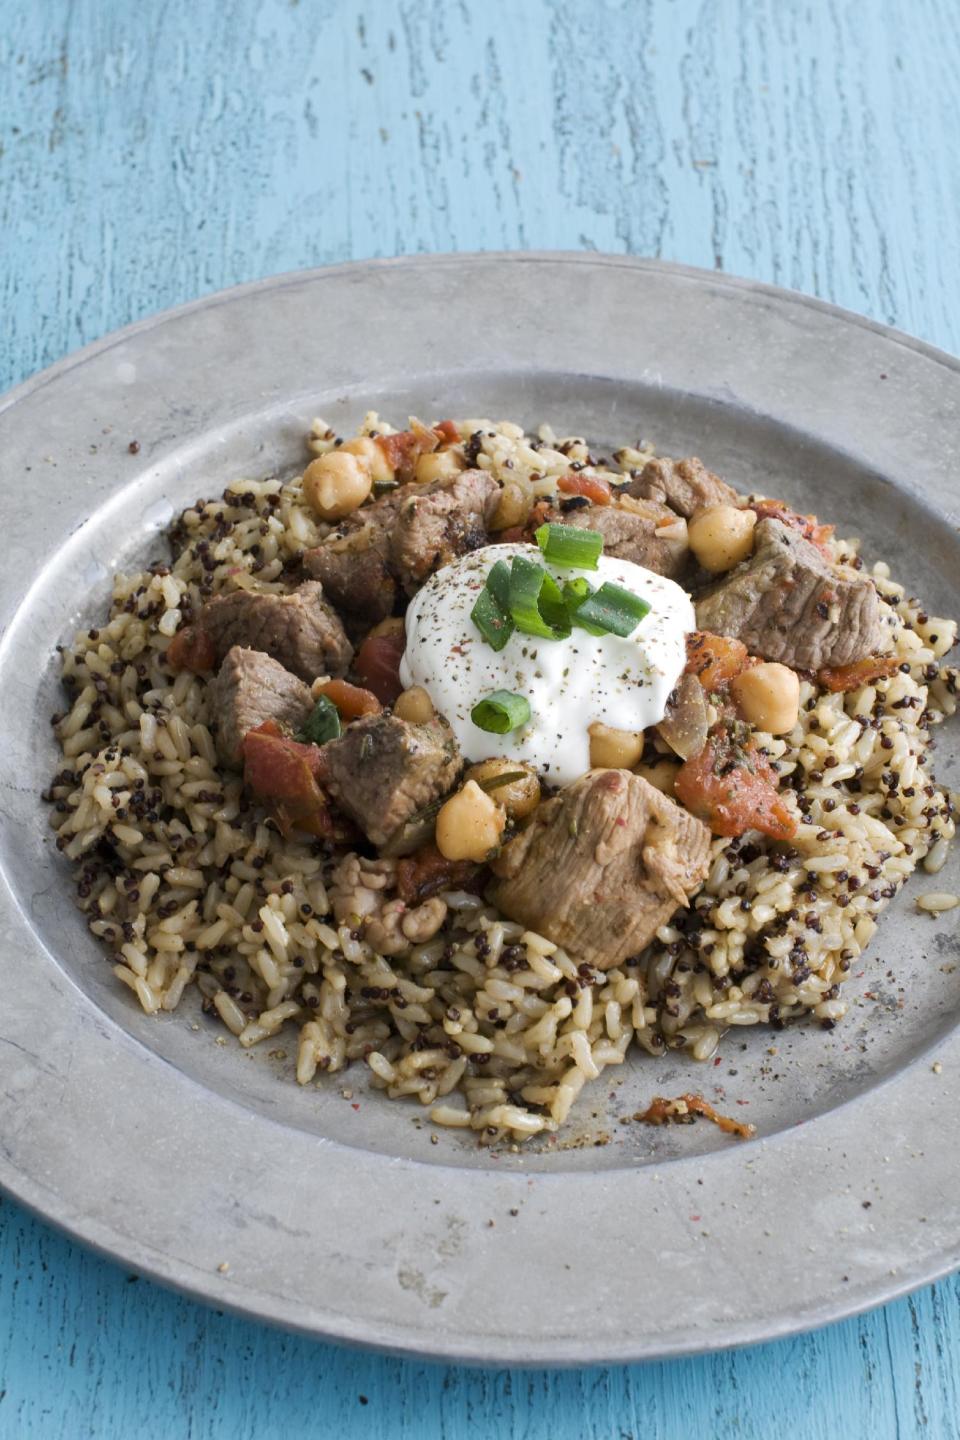 In this image taken on March 18, 2013, rosemary lamb tagine with chickpeas and tomatoes is shown served on a plate in Concord, N.H. (AP Photo/Matthew Mead)